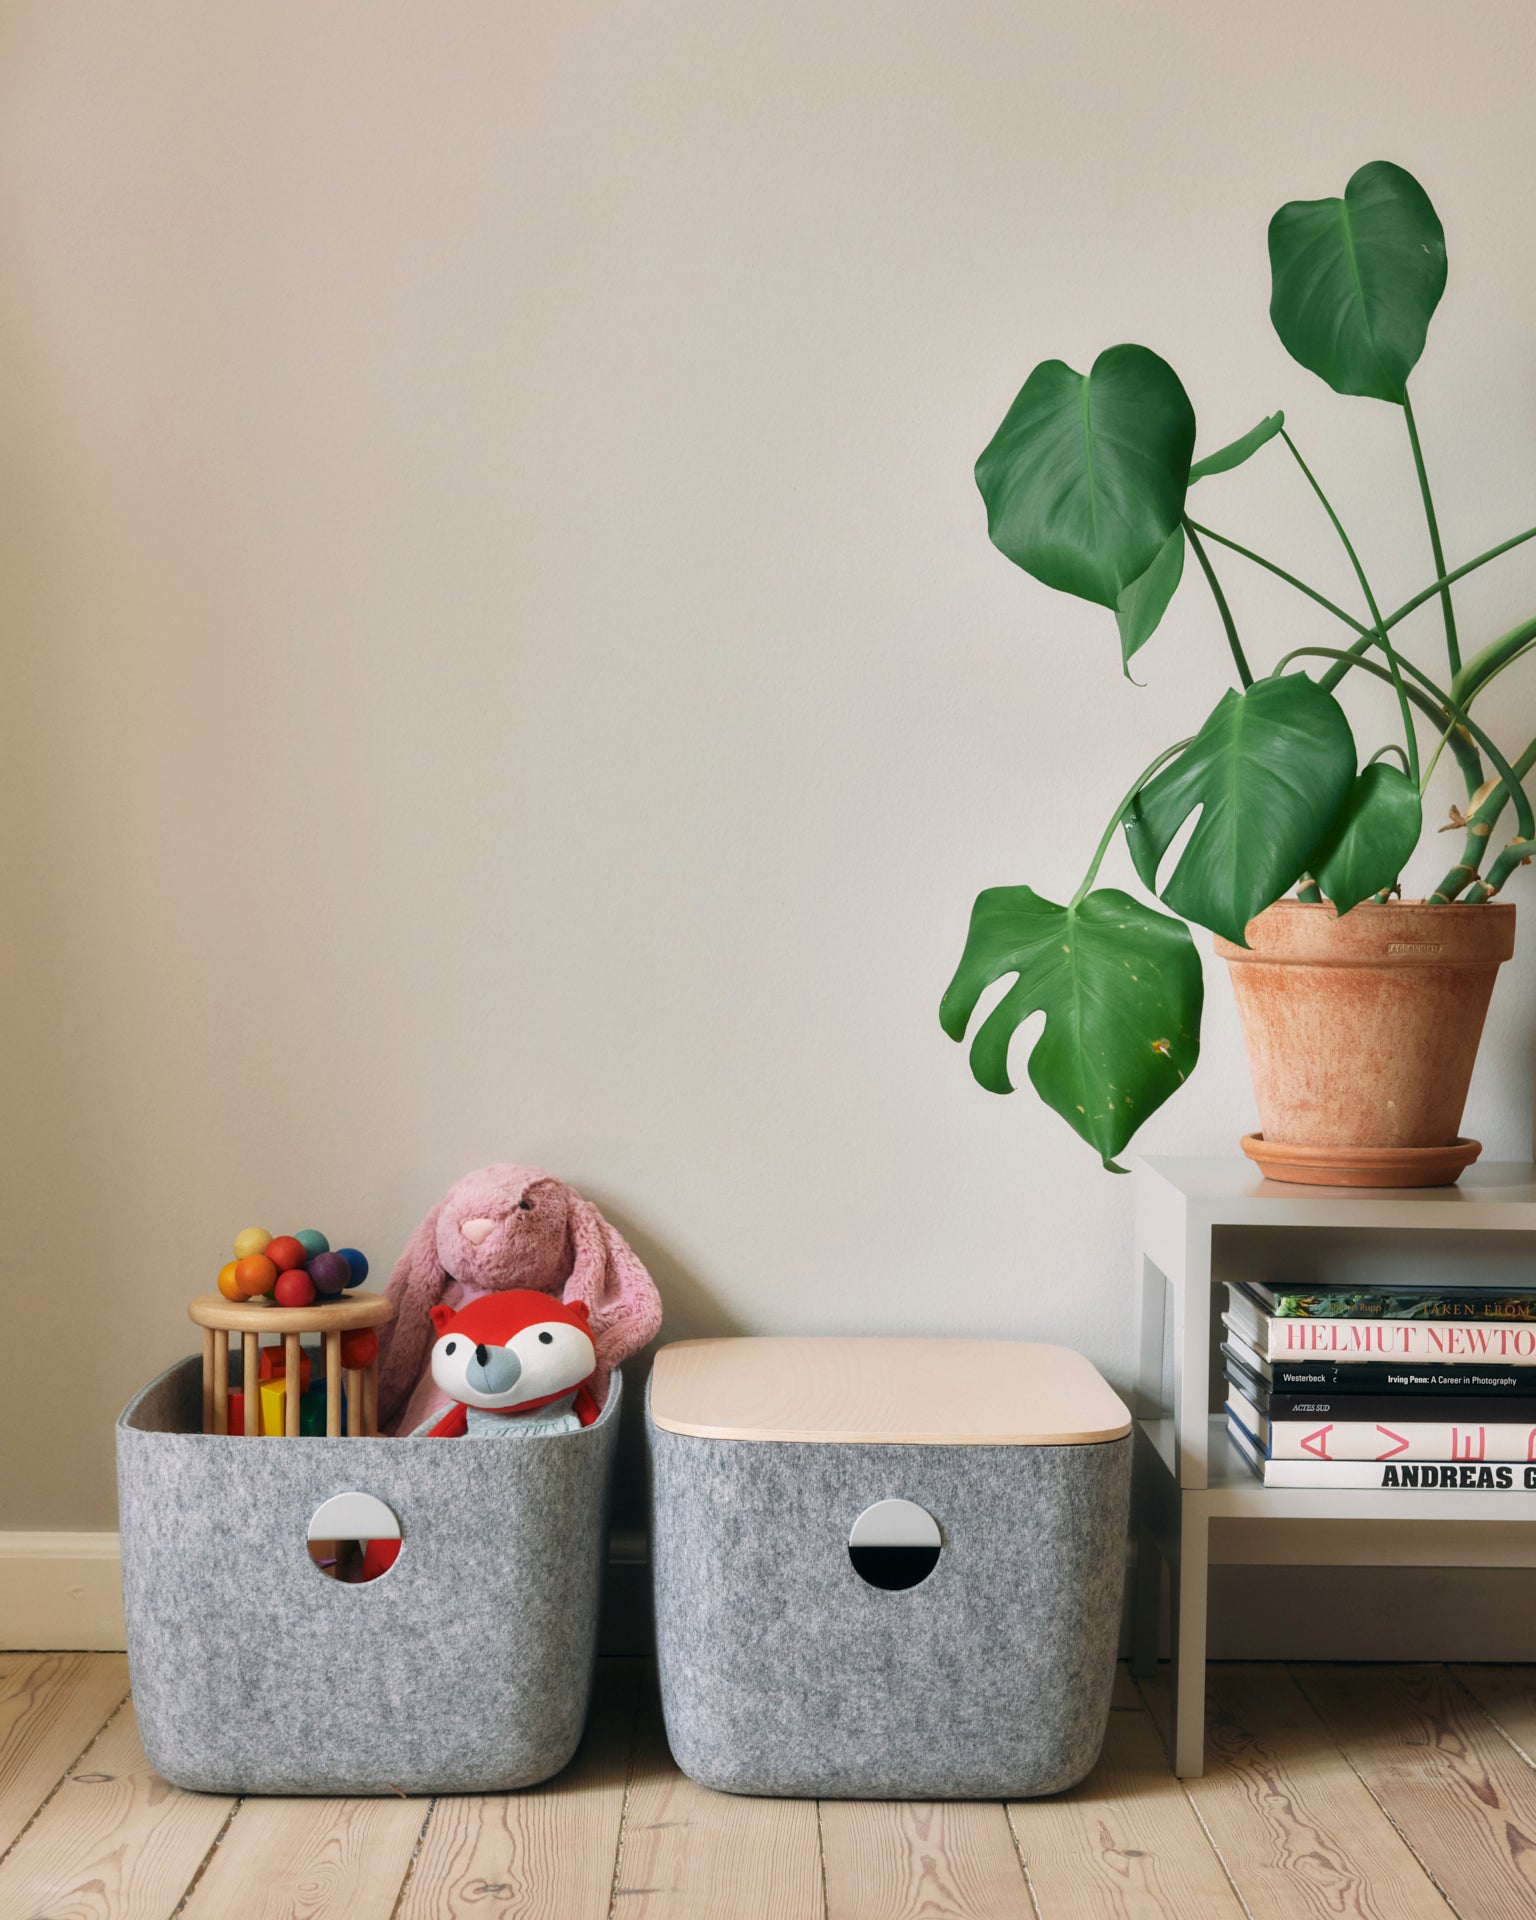 Storage Bins | Storage Baskets And Containers | Open Spaces